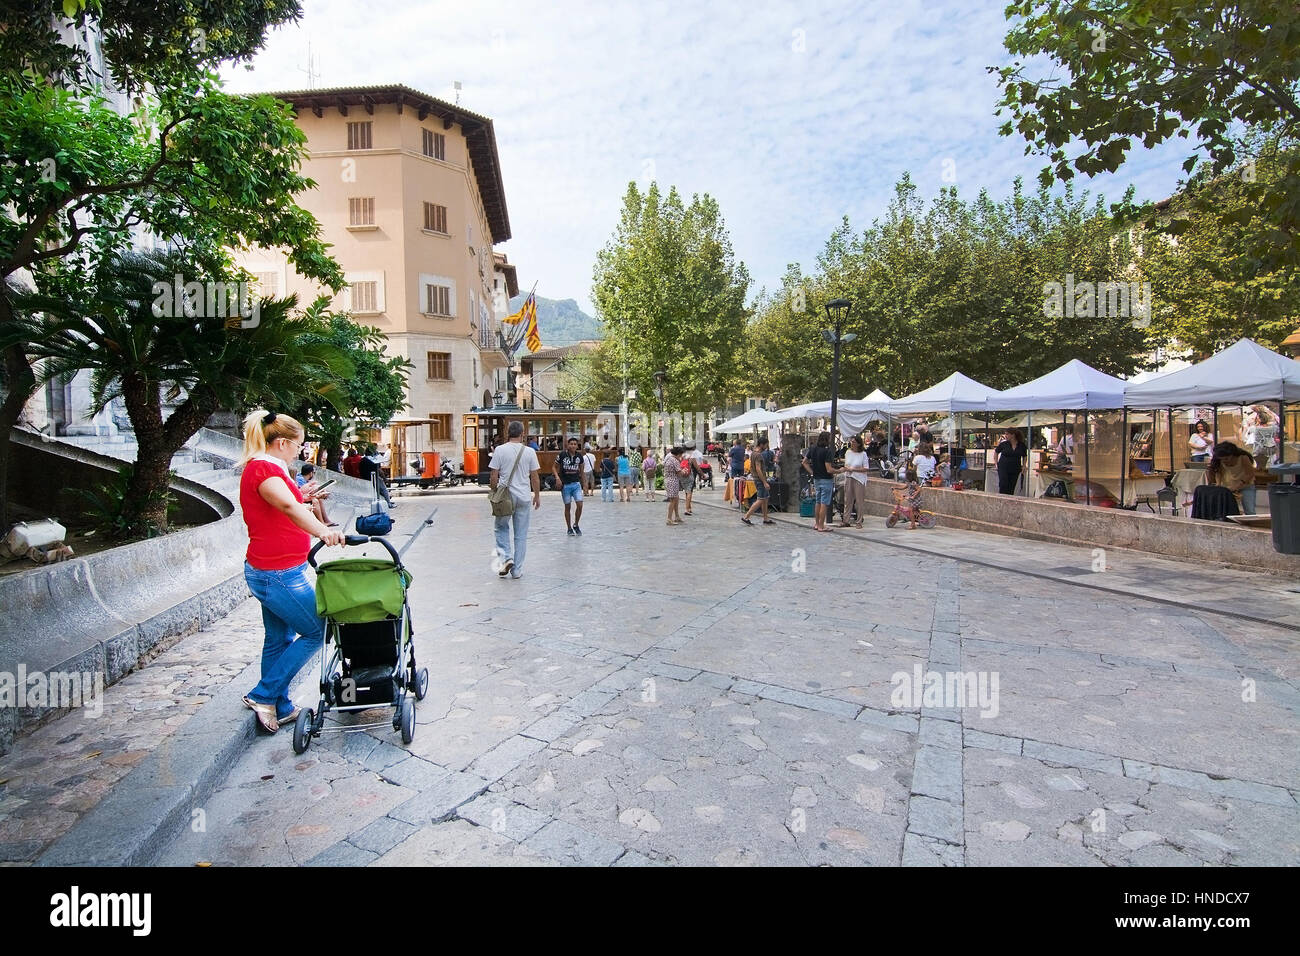 SOLLER, MALLORCA, SPAIN - OCTOBER 2, 2016: Church square with market, tourists and tram on a sunny day on October 2, 2016 in Soller, Mallorca, Baleari Stock Photo